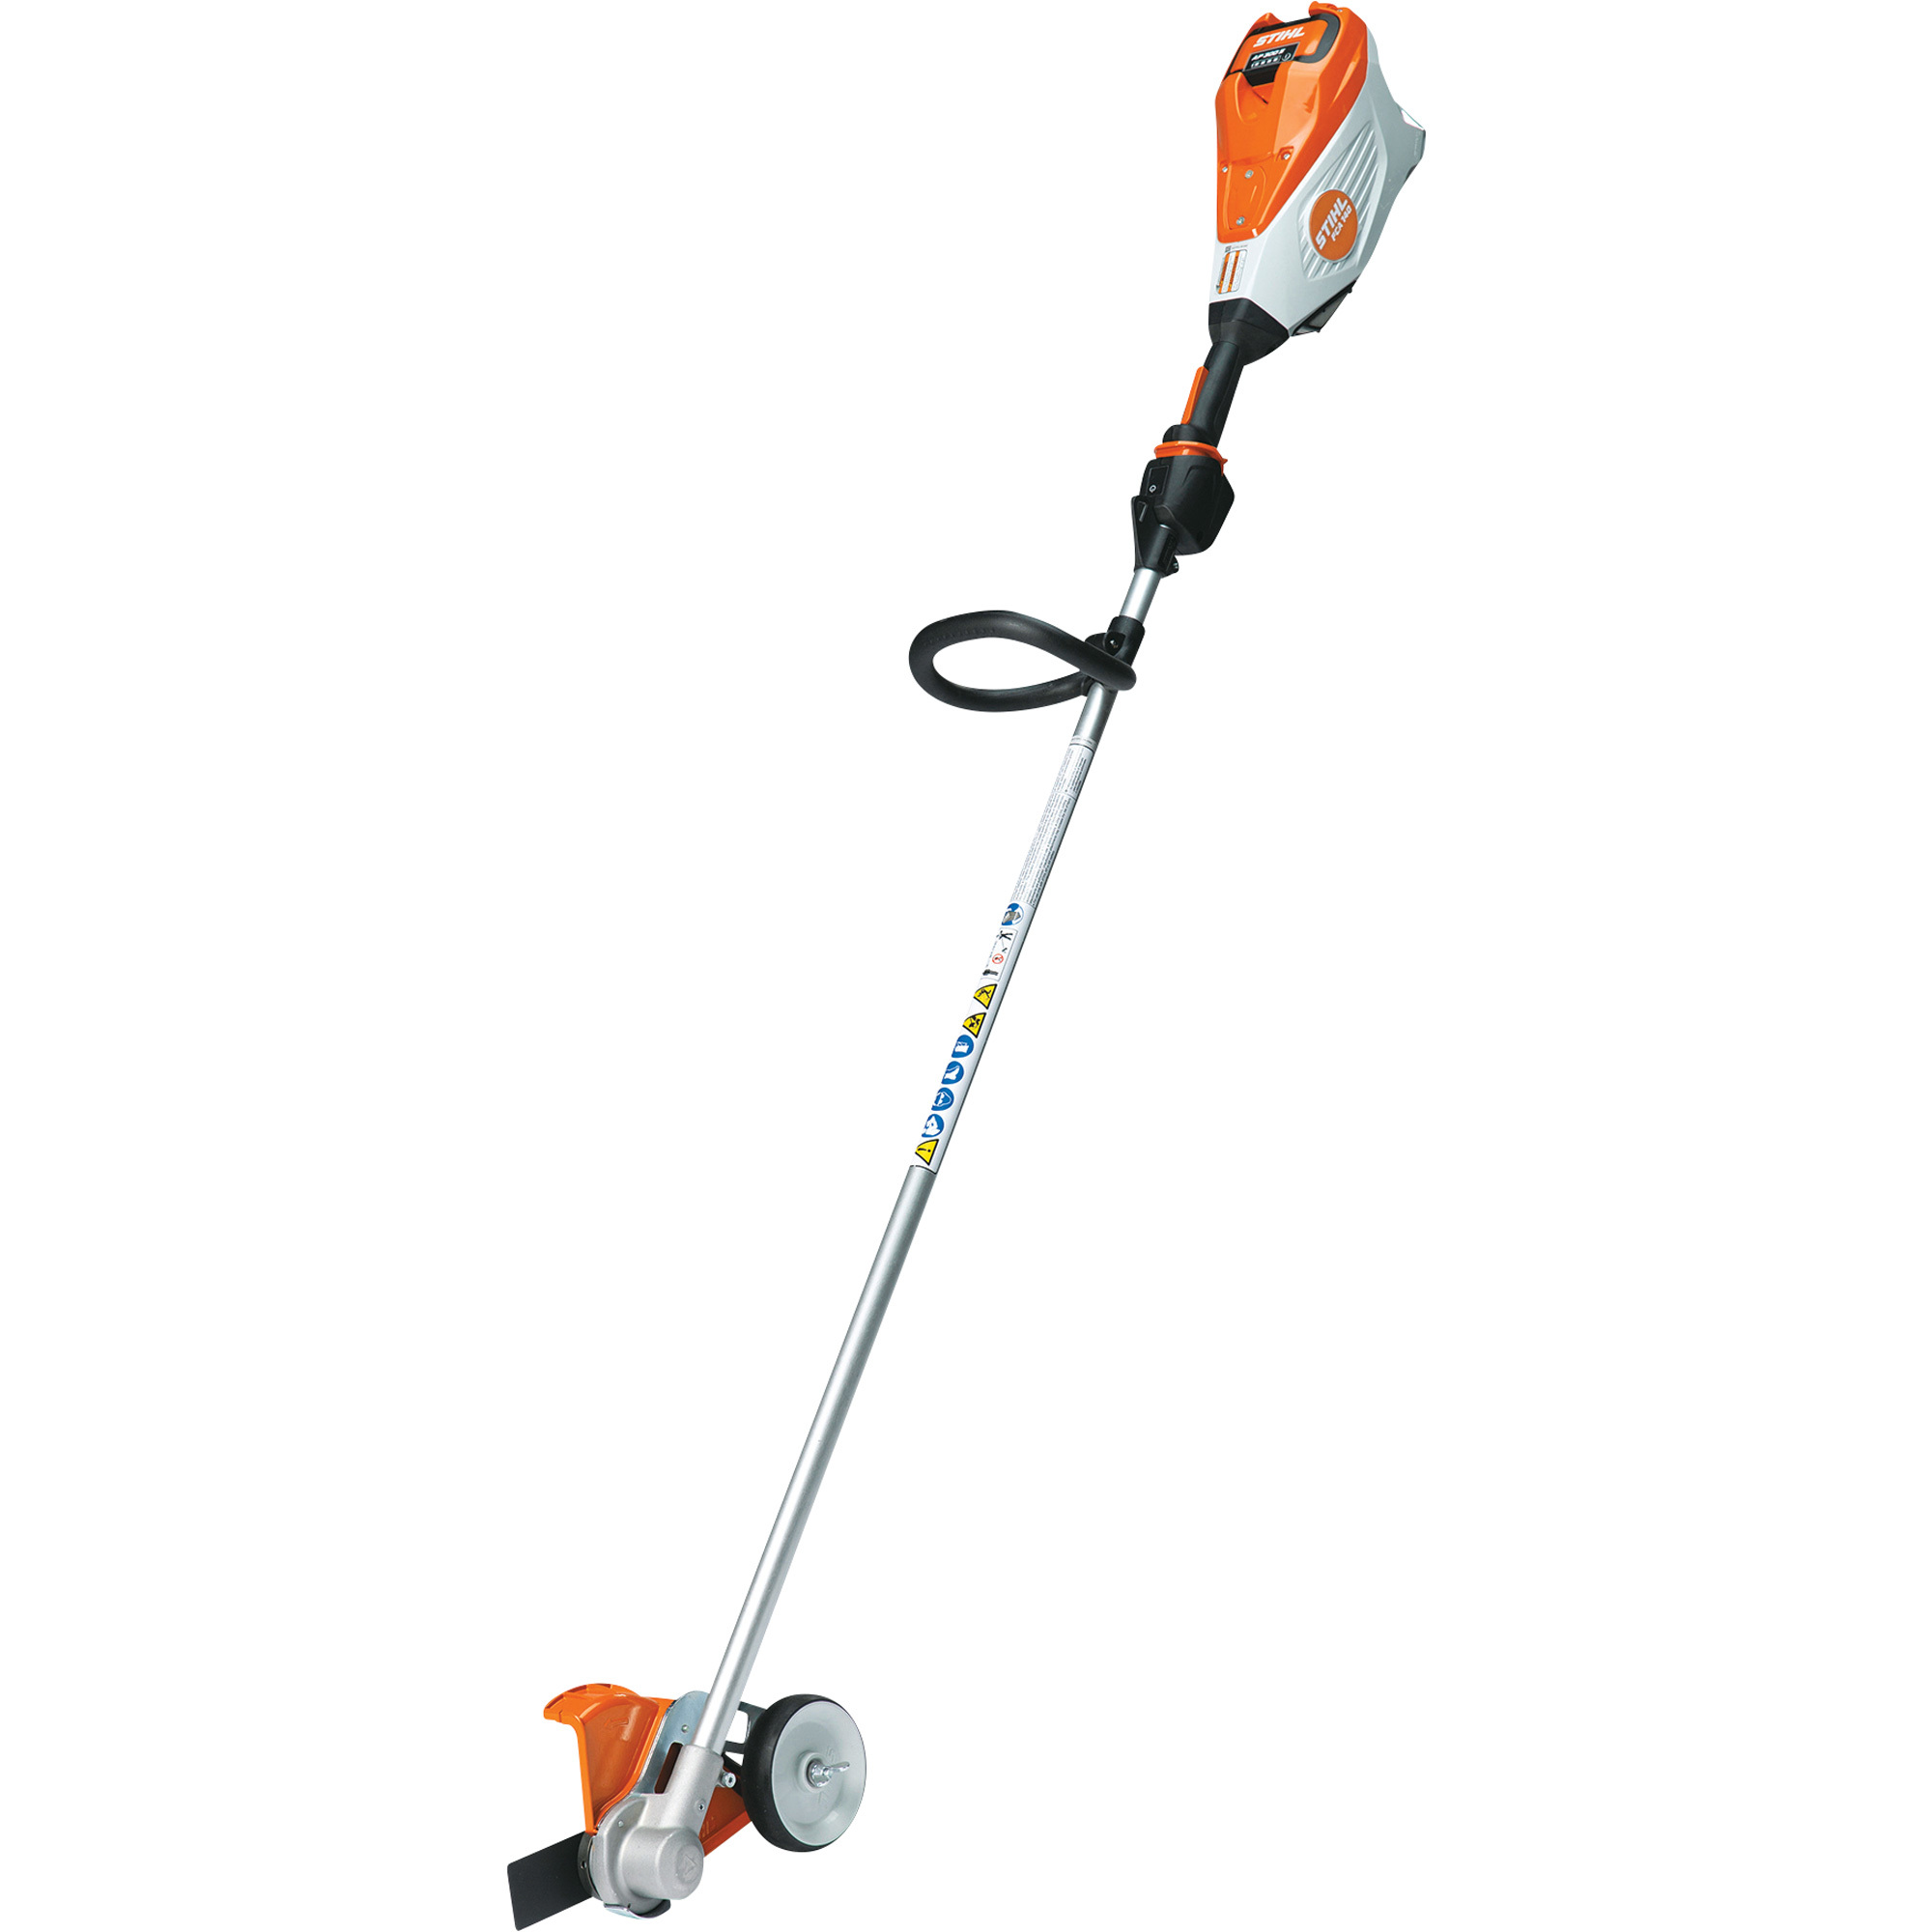 STIHL Battery-Operated Professional Edger â 8Inch Blade, Model FCA 140